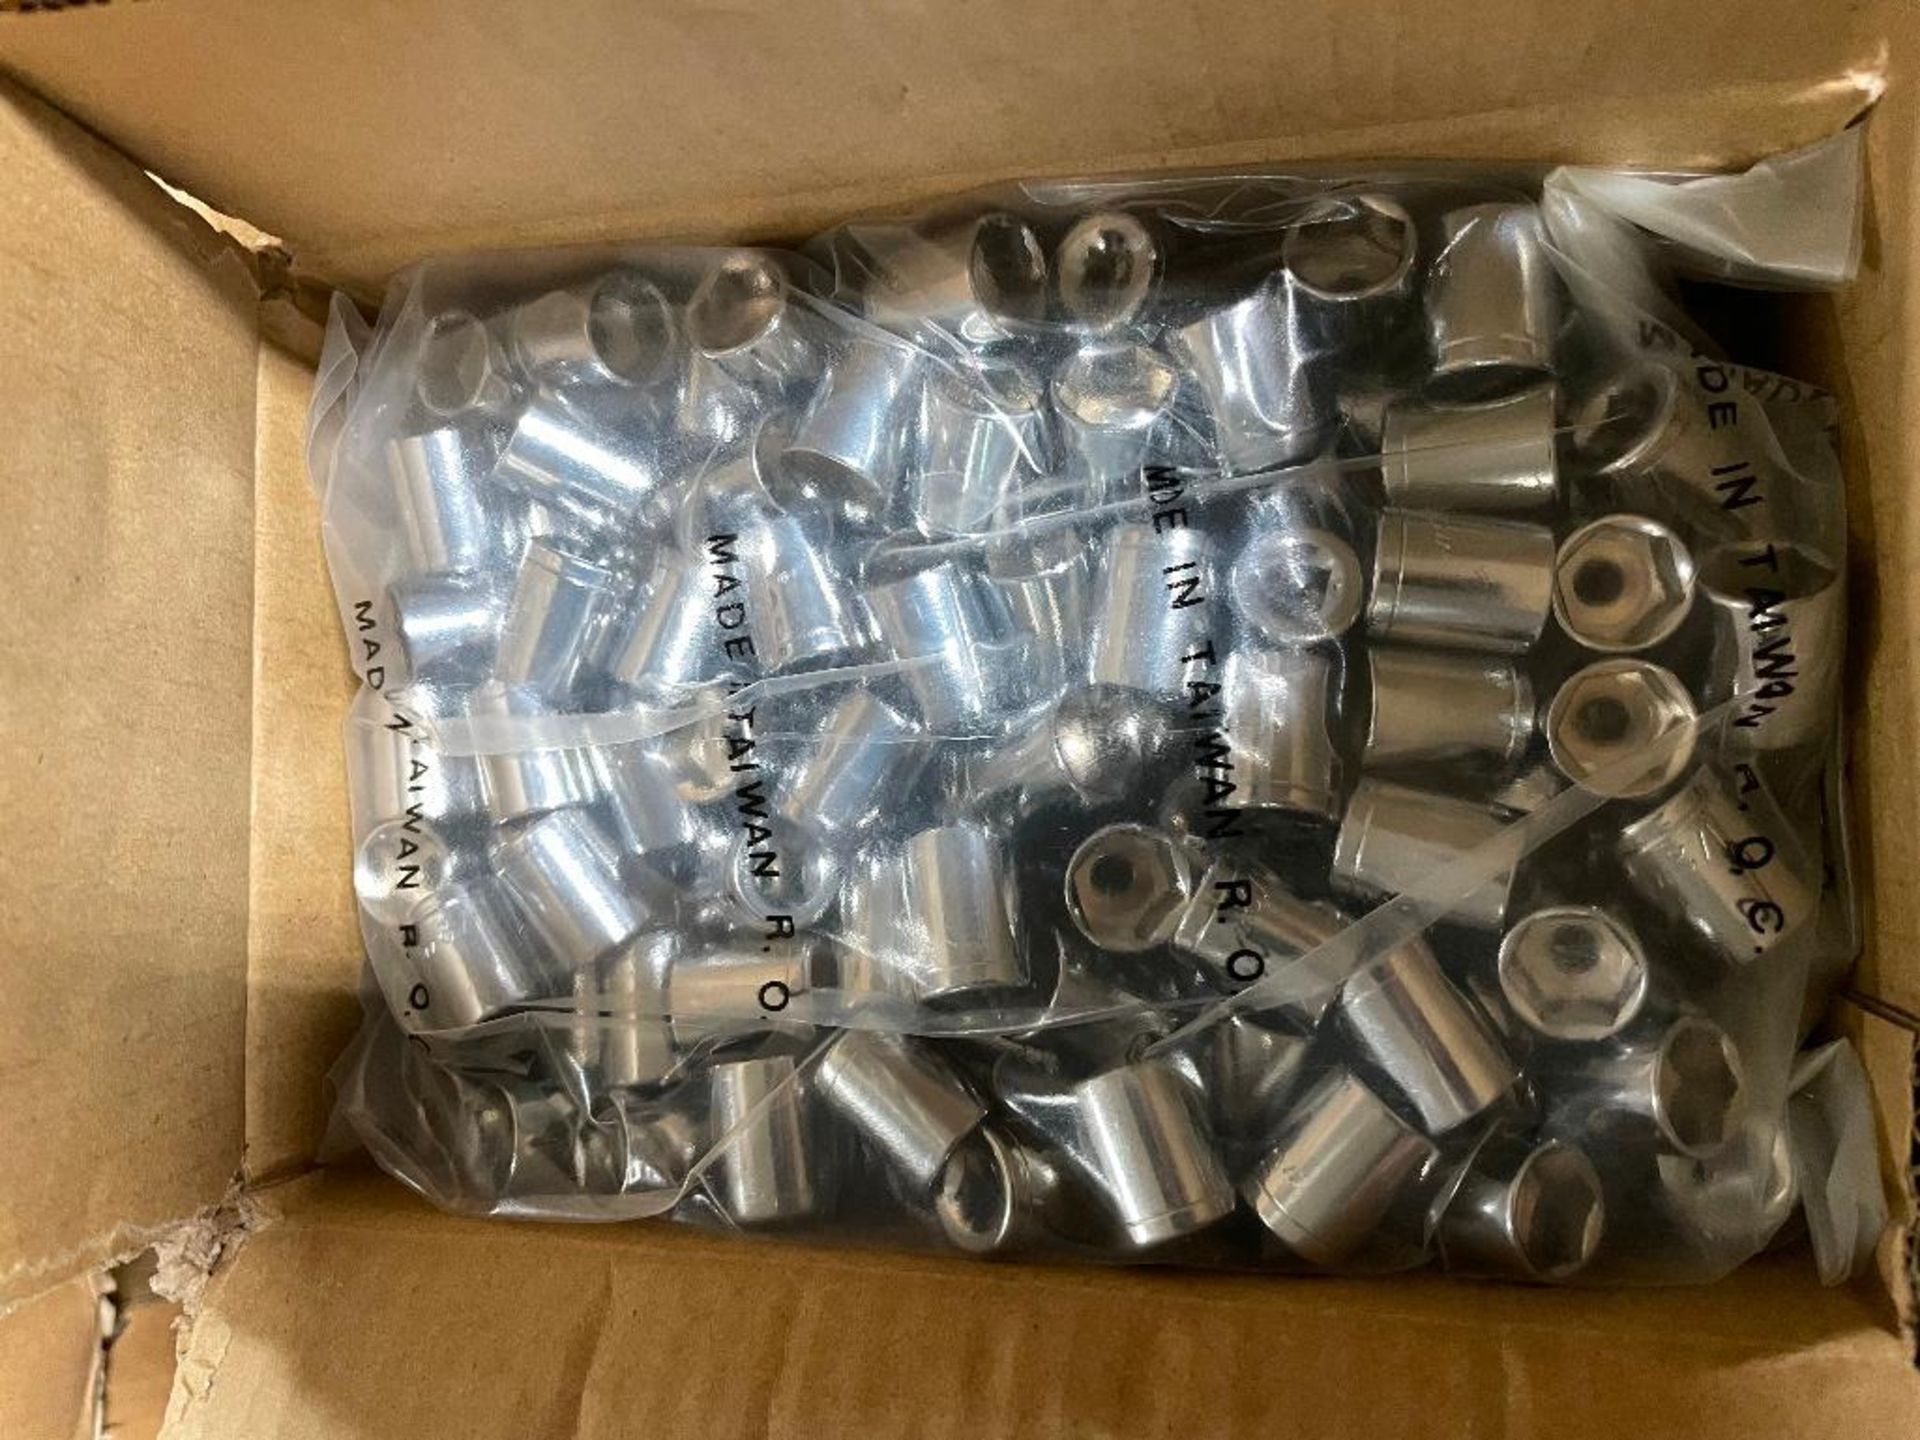 DESCRIPTION: (2) CASES OF 1/2" X 1/4" SOCKETS. 980 PER CASE. 1960 IN LOT THIS LOT IS: ONE MONEY QTY: